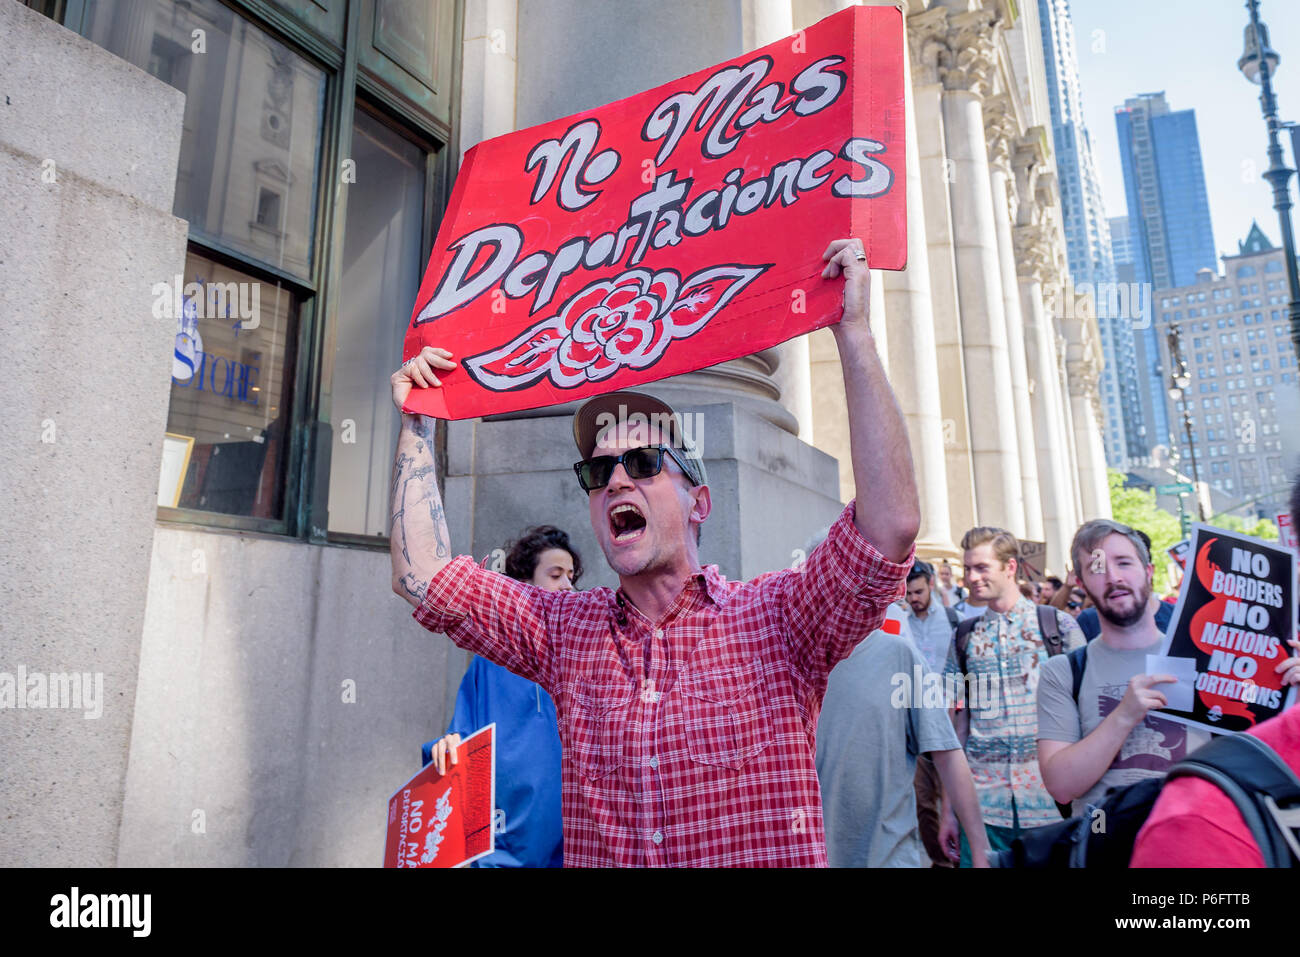 New York, United States. 29th June, 2018. The NYC Democratic Socialists of America organized the march to #AbolishICE. The march began at City Hall, walk past the Attorney General's Office, and end at 26 Federal Plaza-the site of ICE's Enforcement Removal Operations Office. Credit: Erik McGregor/Pacific Press/Alamy Live News Stock Photo